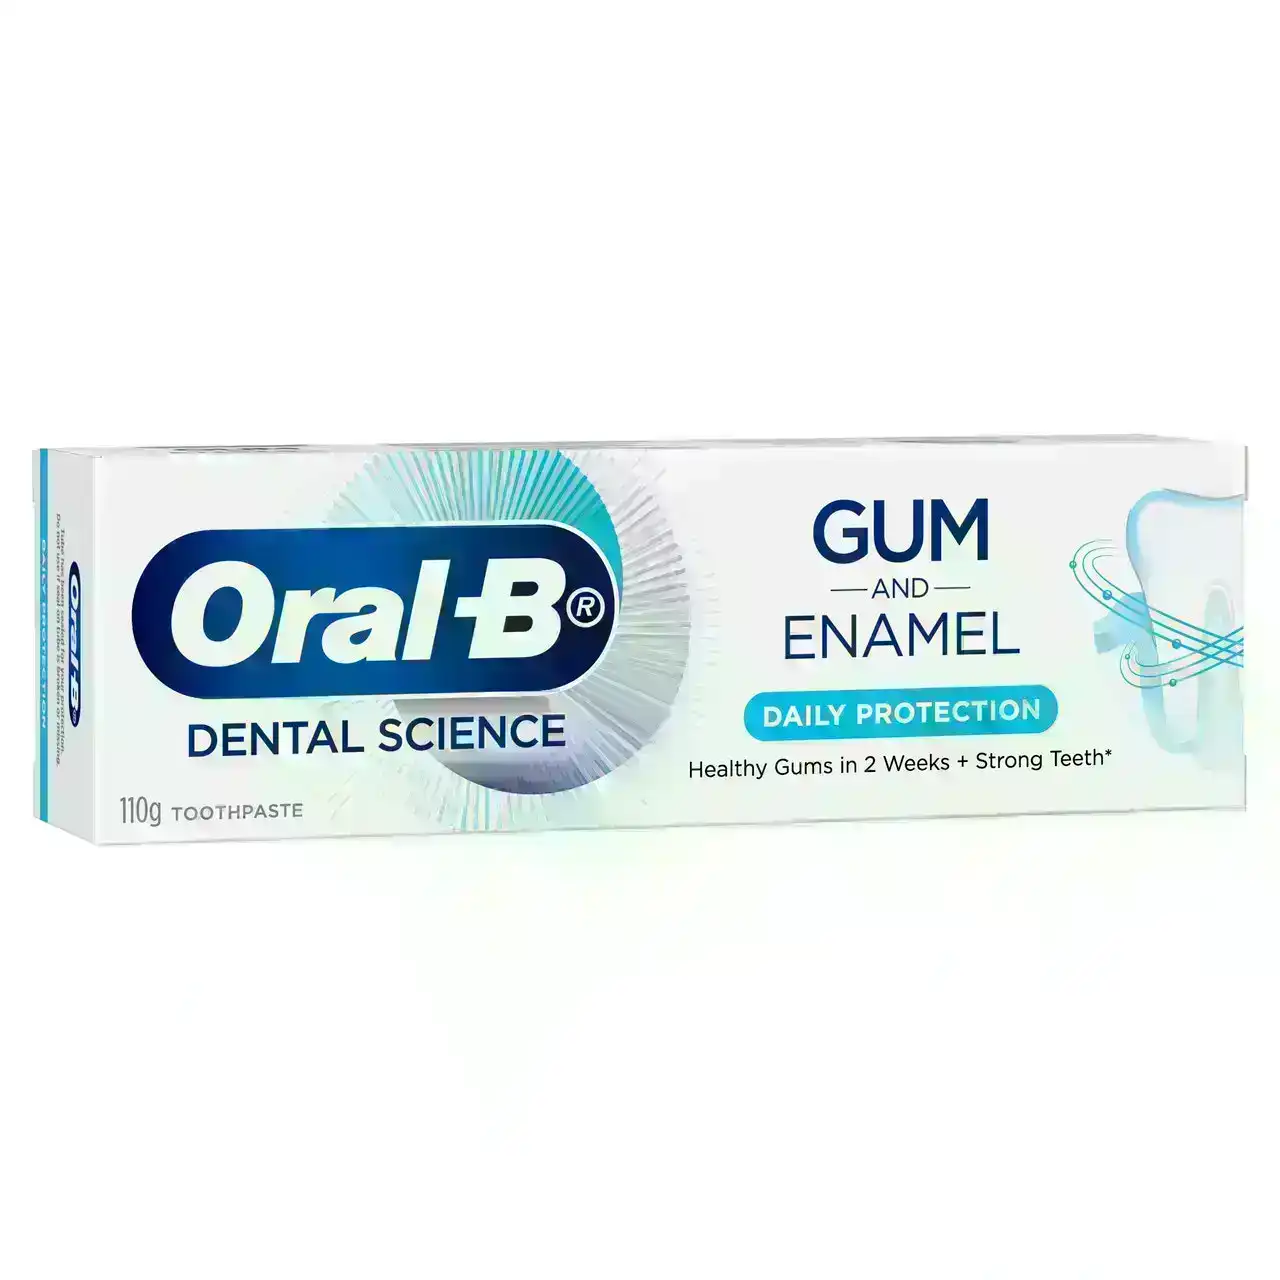 Oral-B Gum Care &amp; Enamel Daily Protection Toothpaste Mint 110g